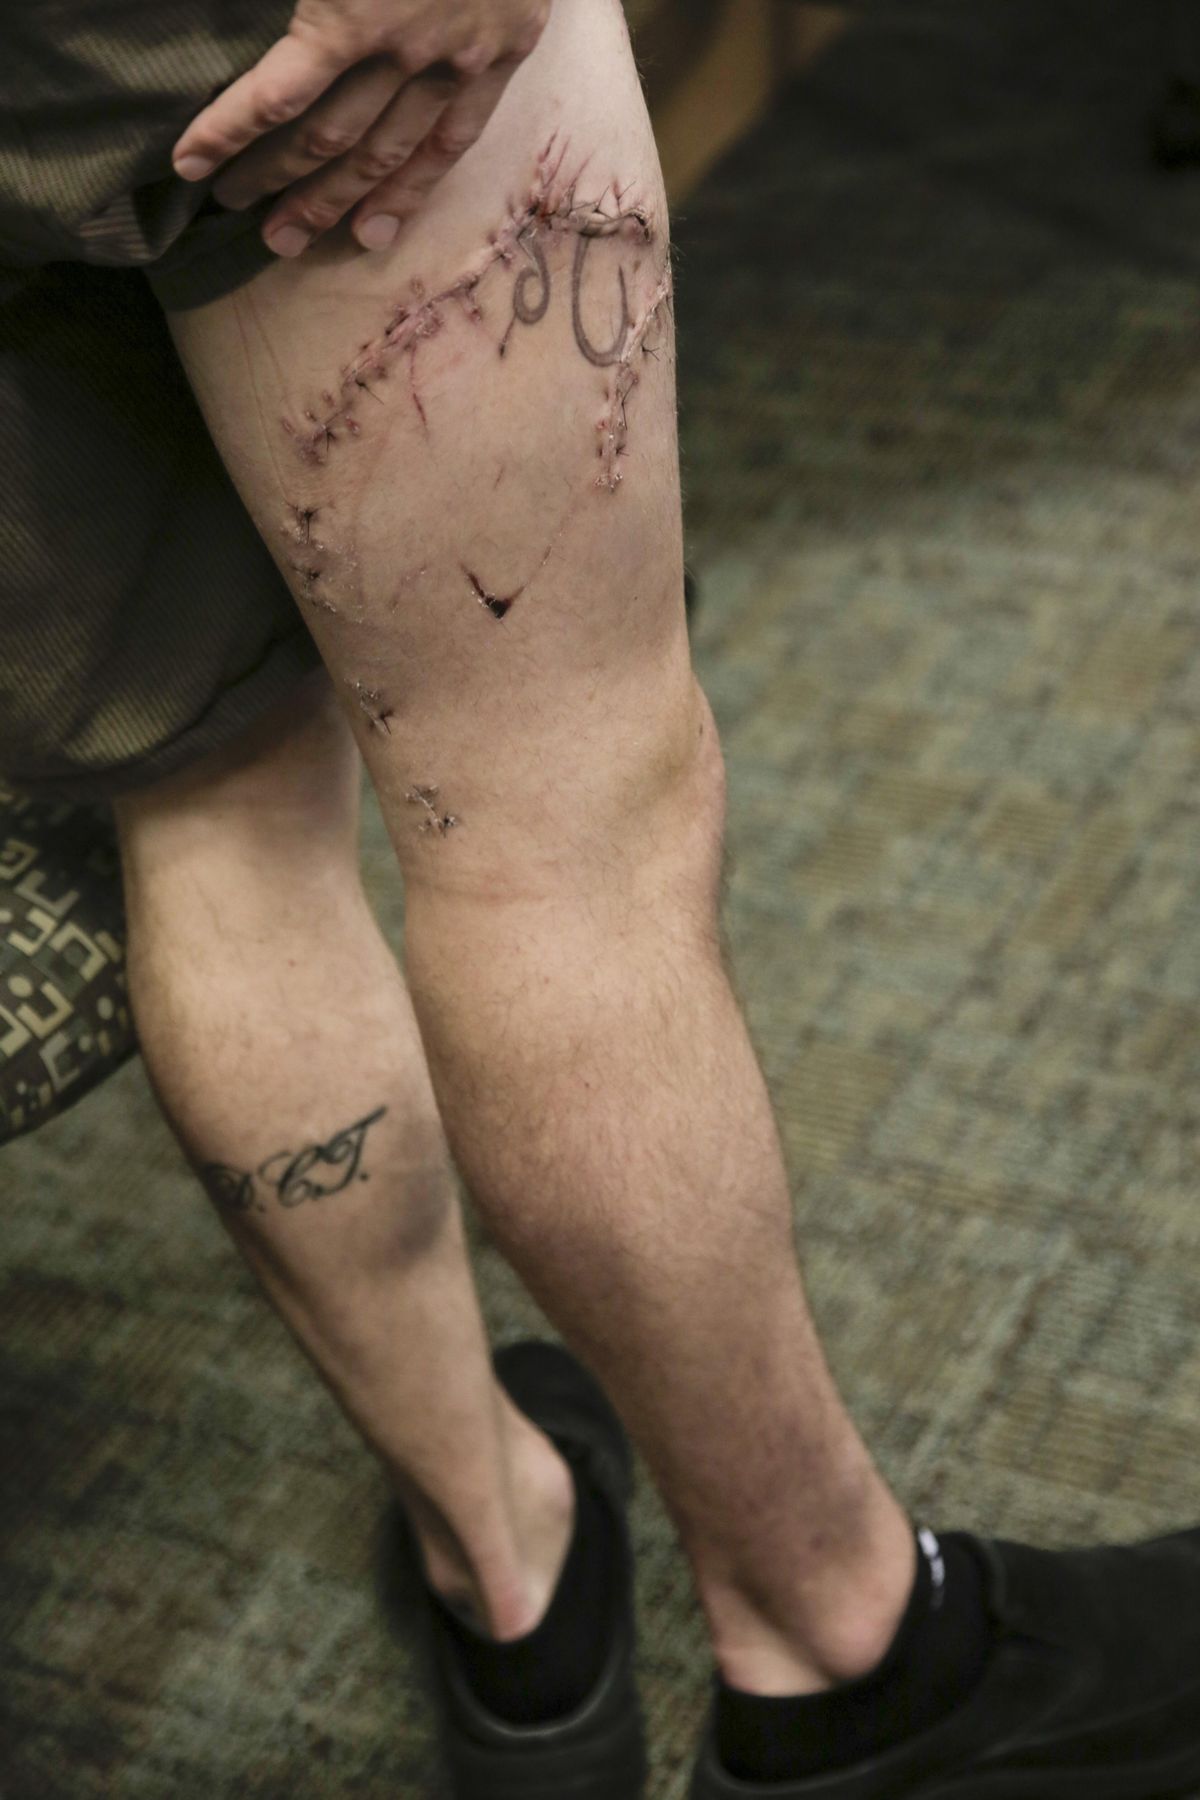 Joseph Tanner exhibits his still-healing injuries after he survived a shark attack while surfing on the Oregon Coast on Oct. 10. He spoke with media Wednesday at Portland’s Legacy Emanuel Medical Center, where he is a critical care nurse. (Stephanie Yao Long / AP)